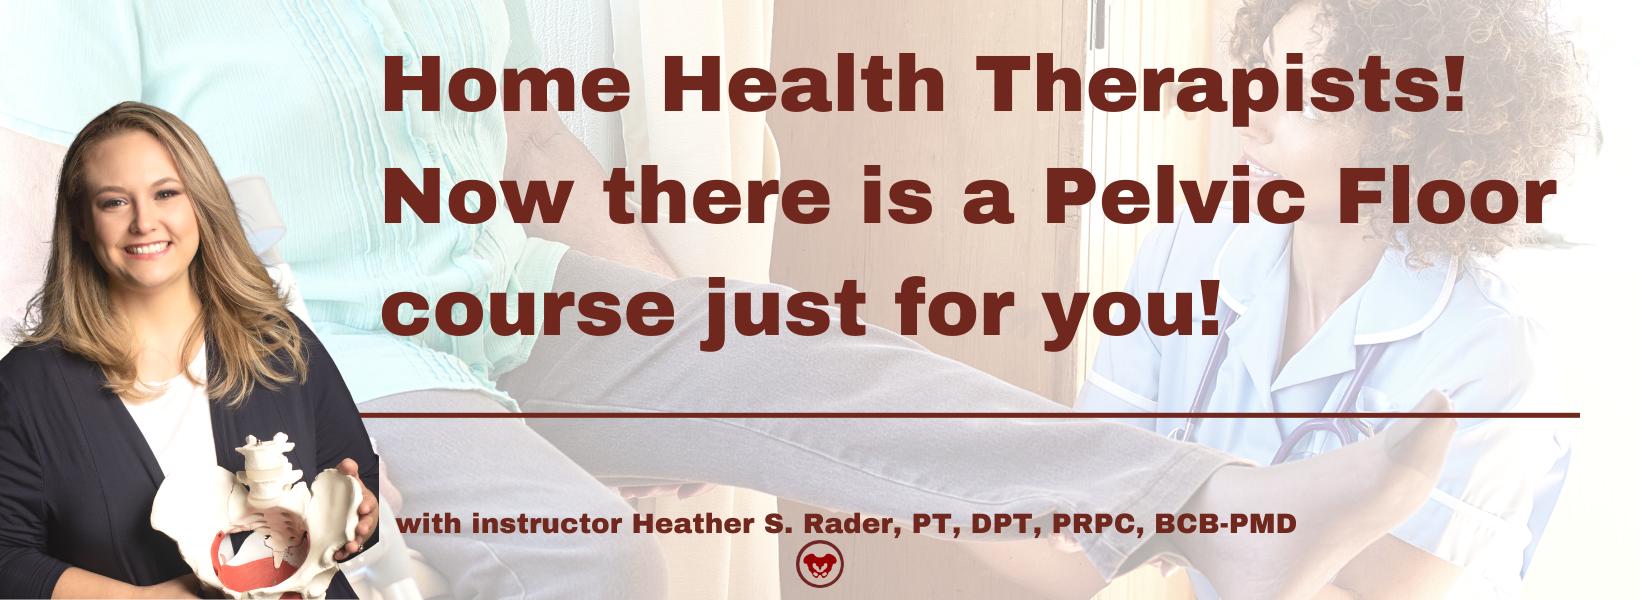 Home Health Therapists! Now there is a Pelvic Floor course just for you!